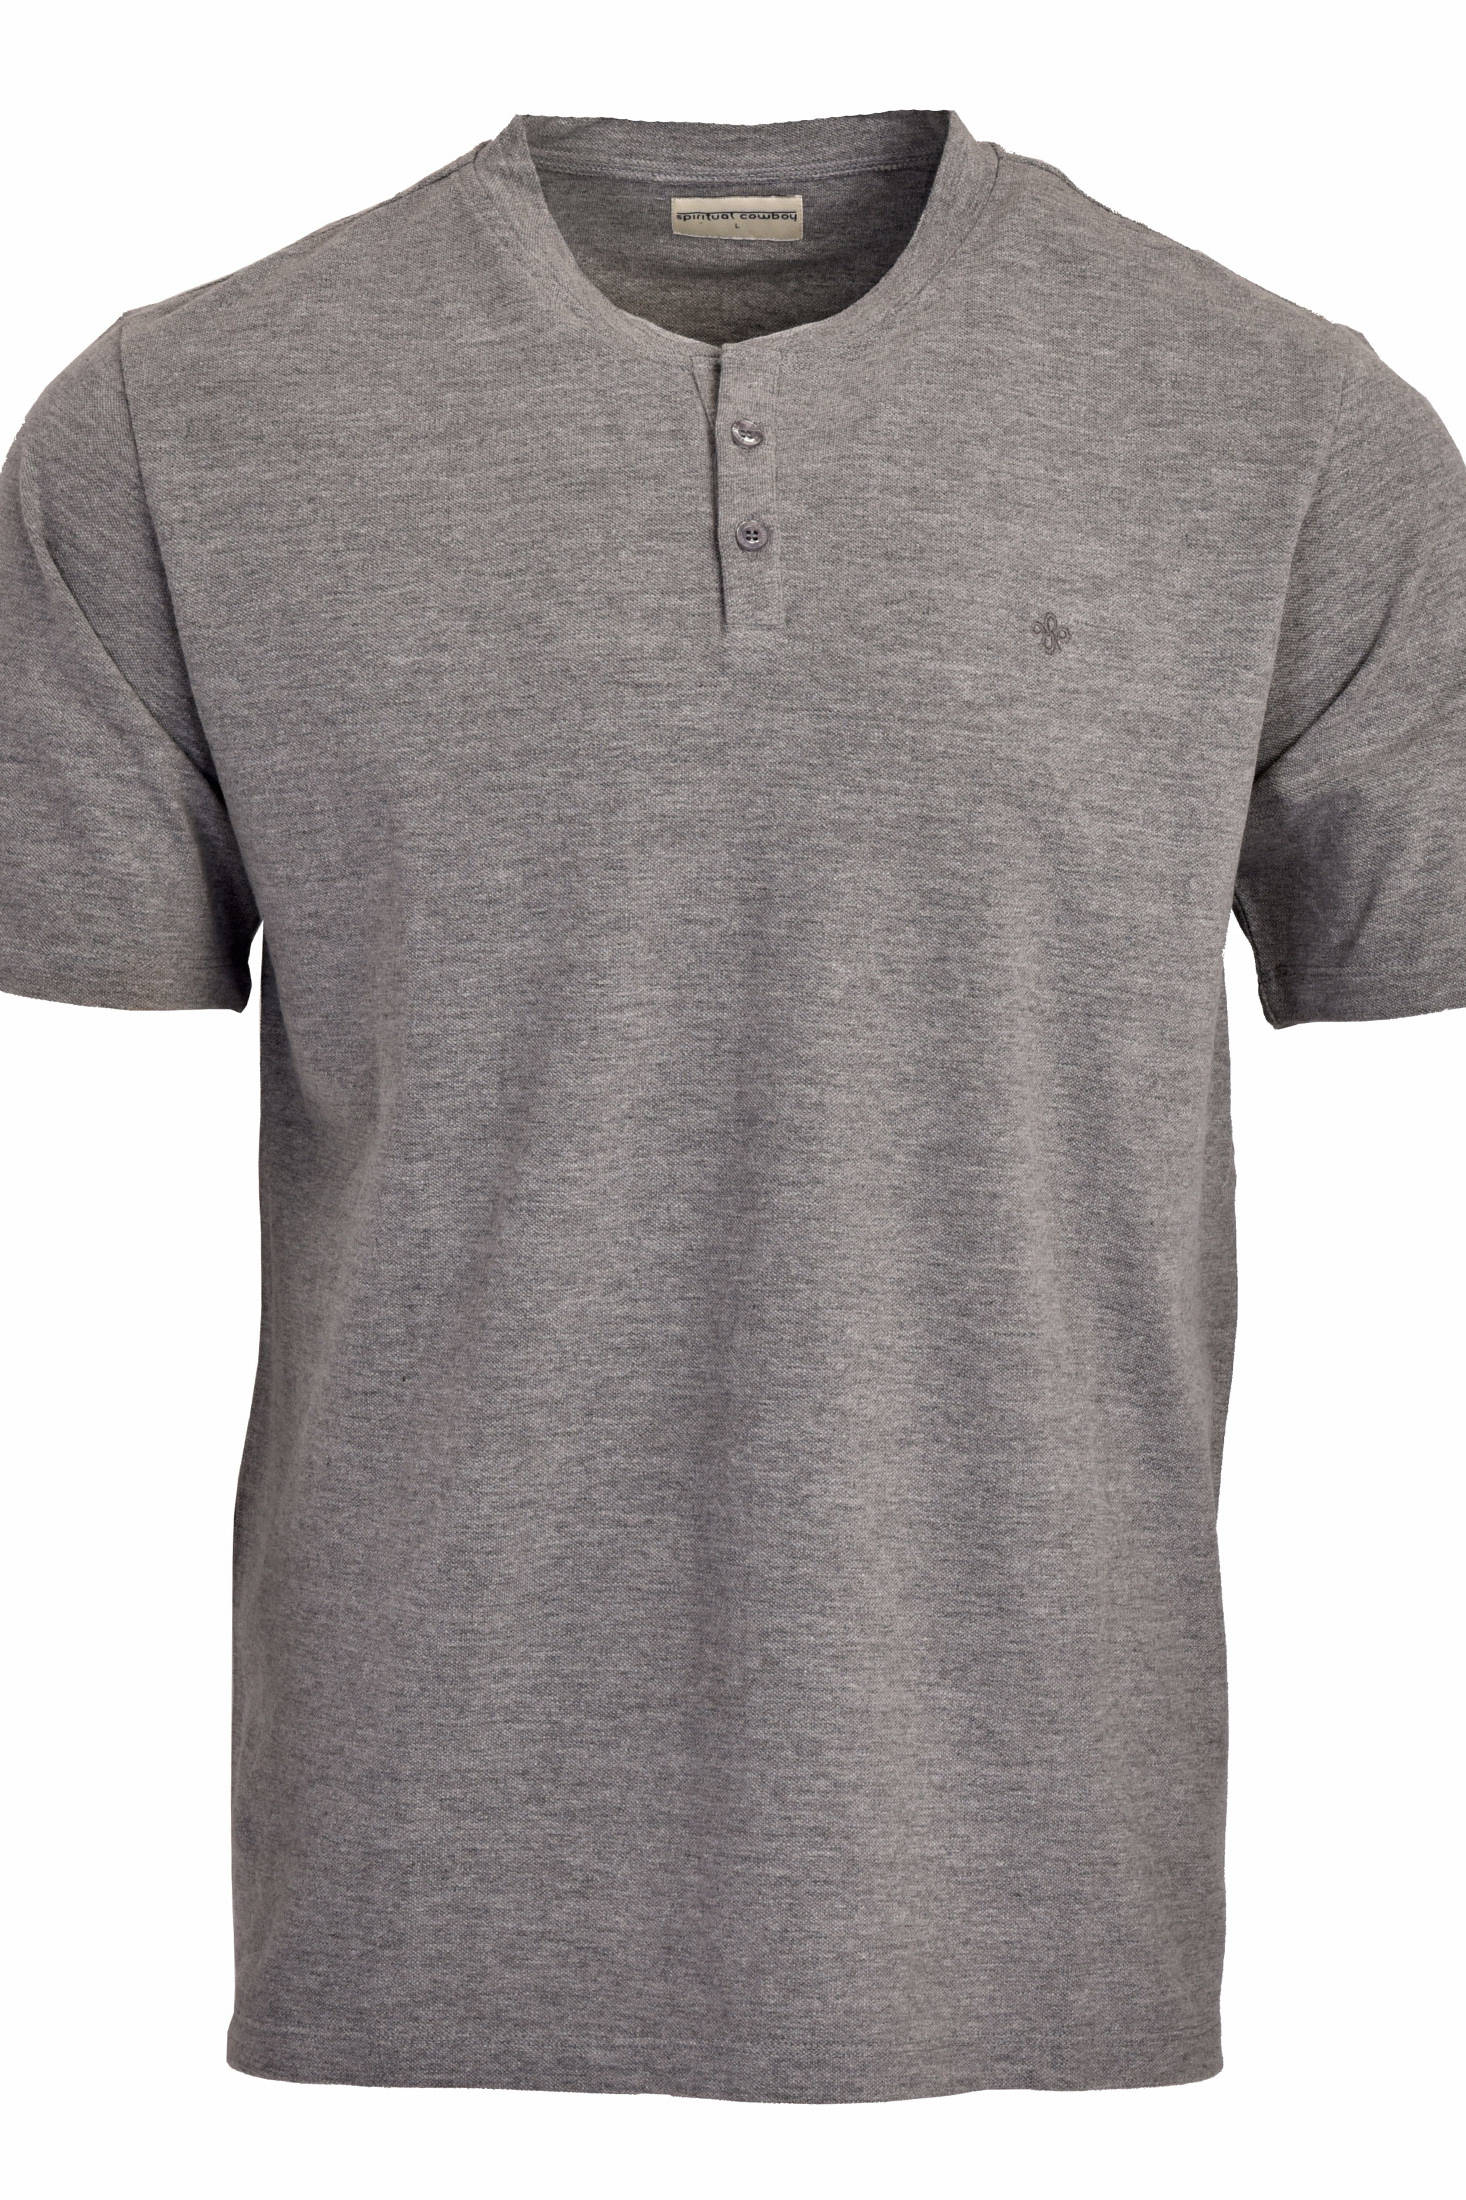 Barra Cotton Tee Grey Front View